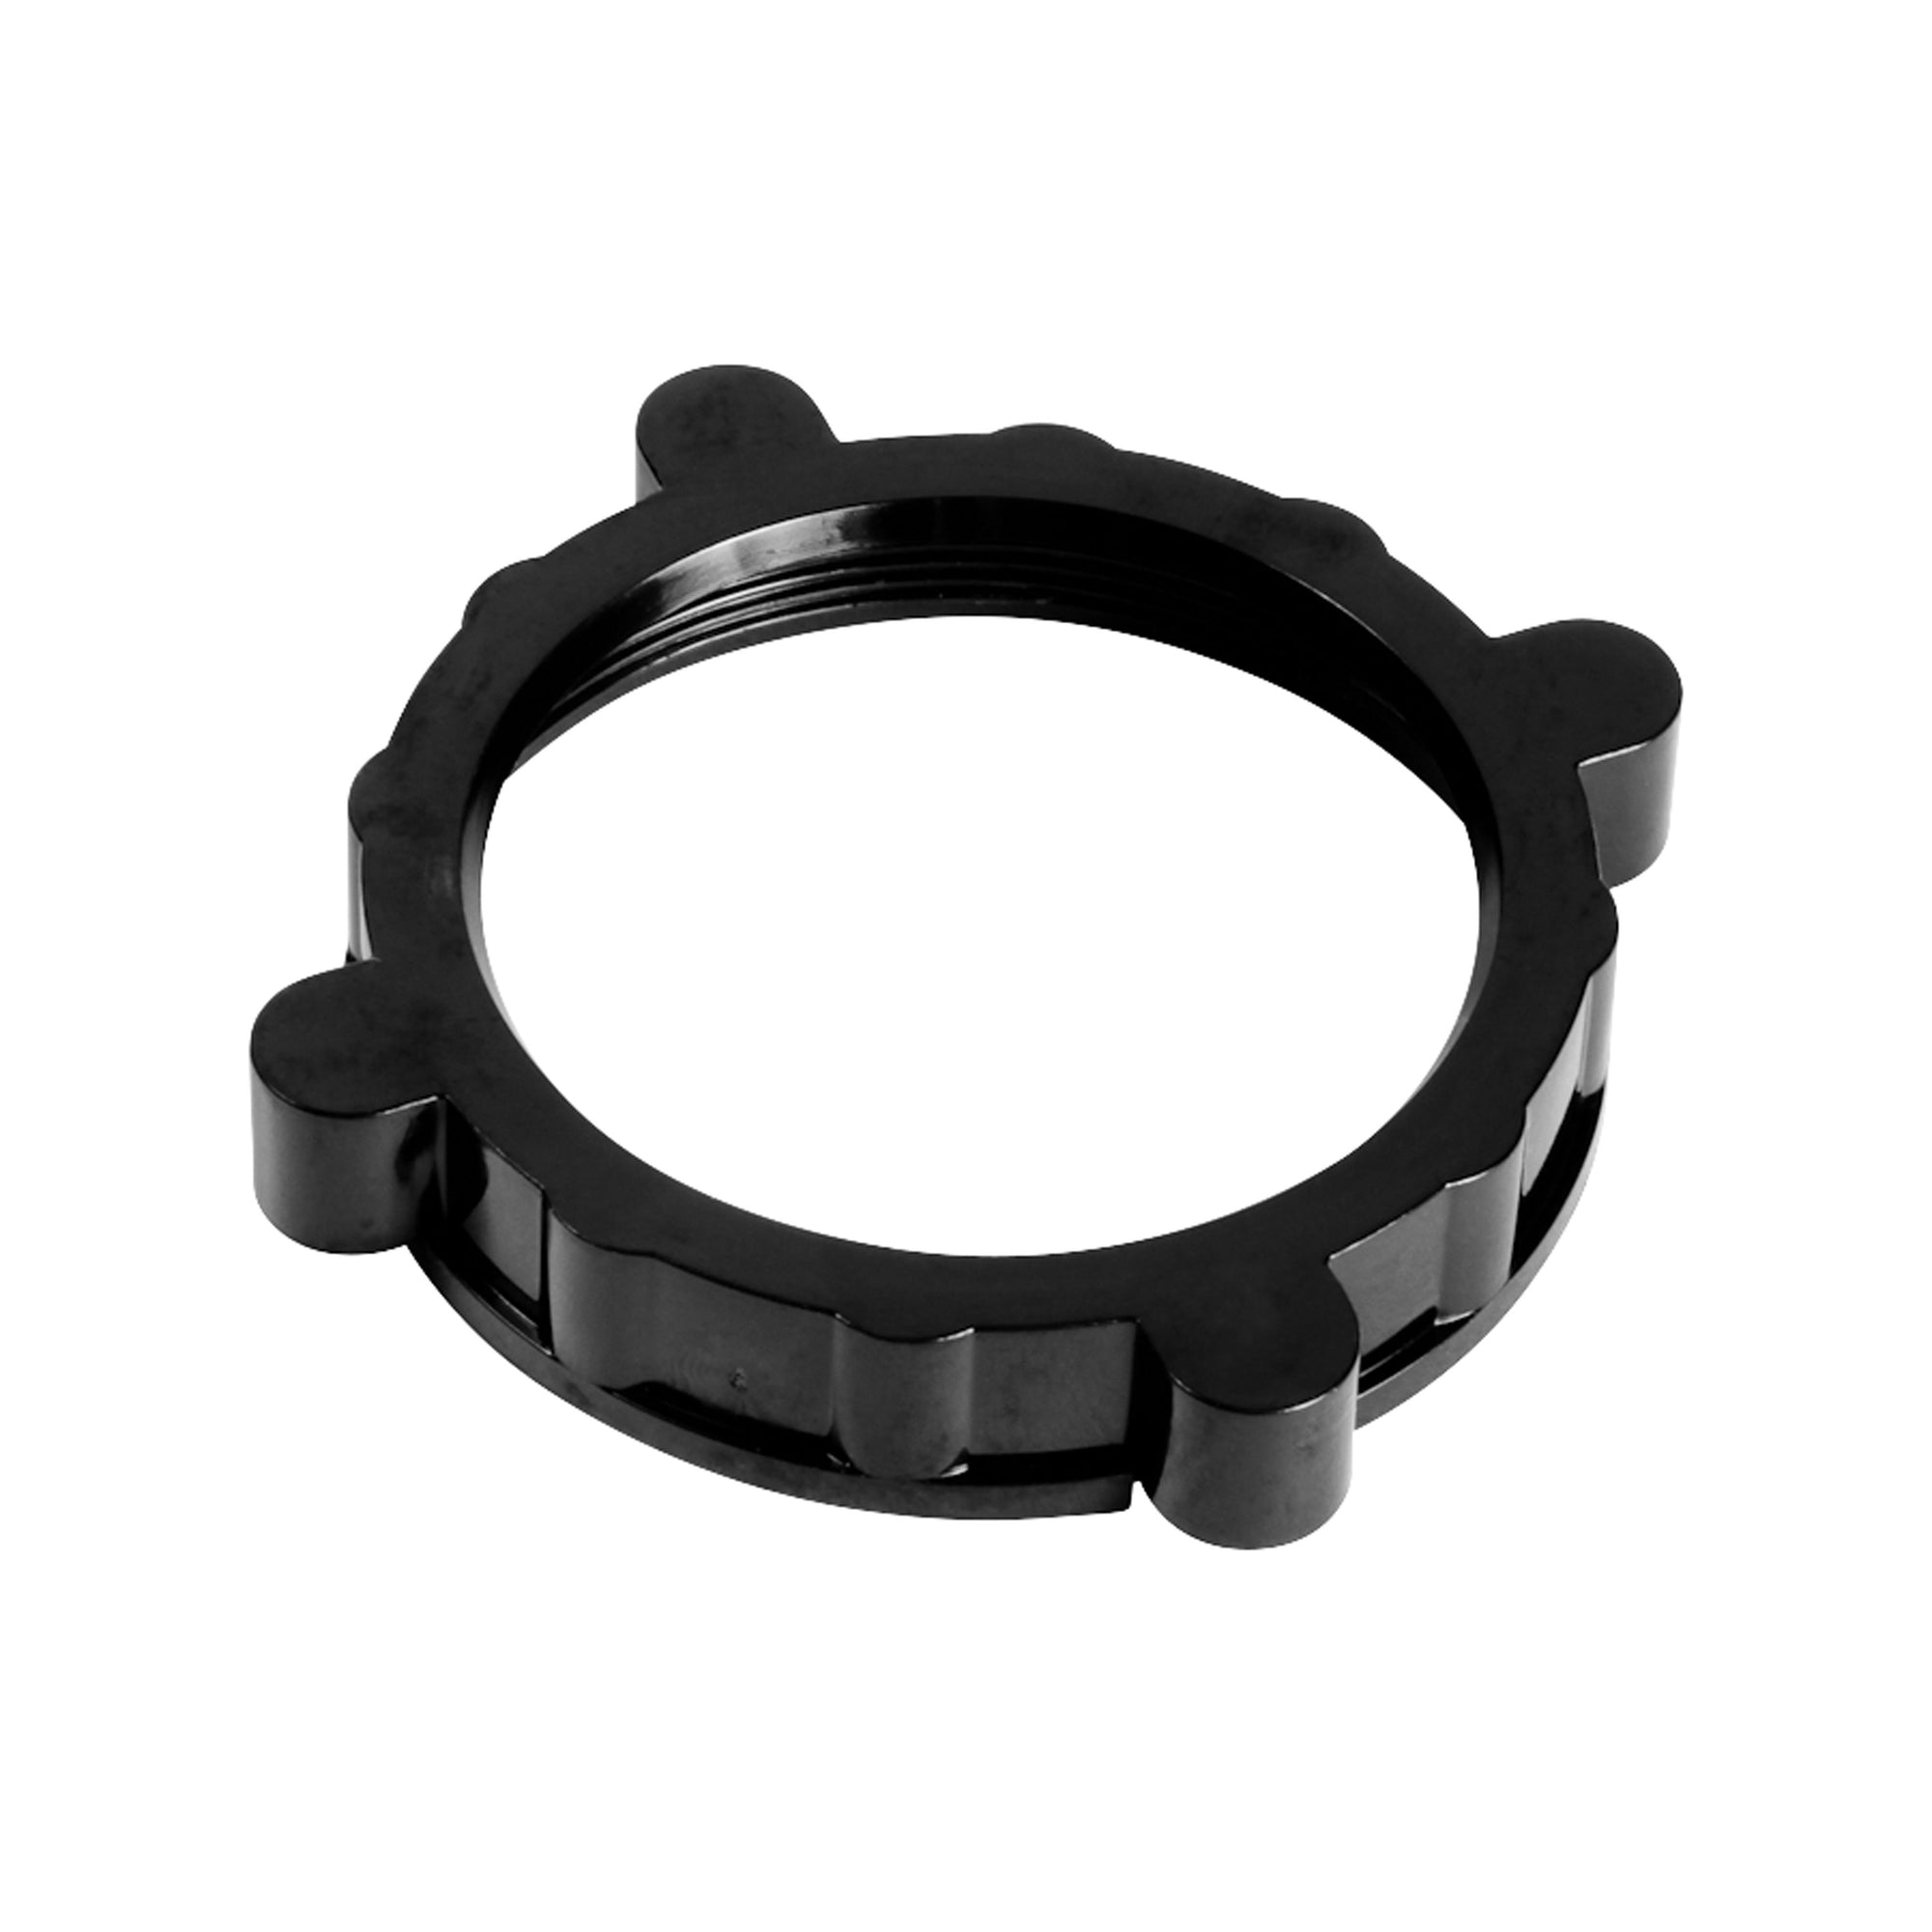 Camco 55537 Replacement Locking Ring For Locking 30A Power Grip Adapters